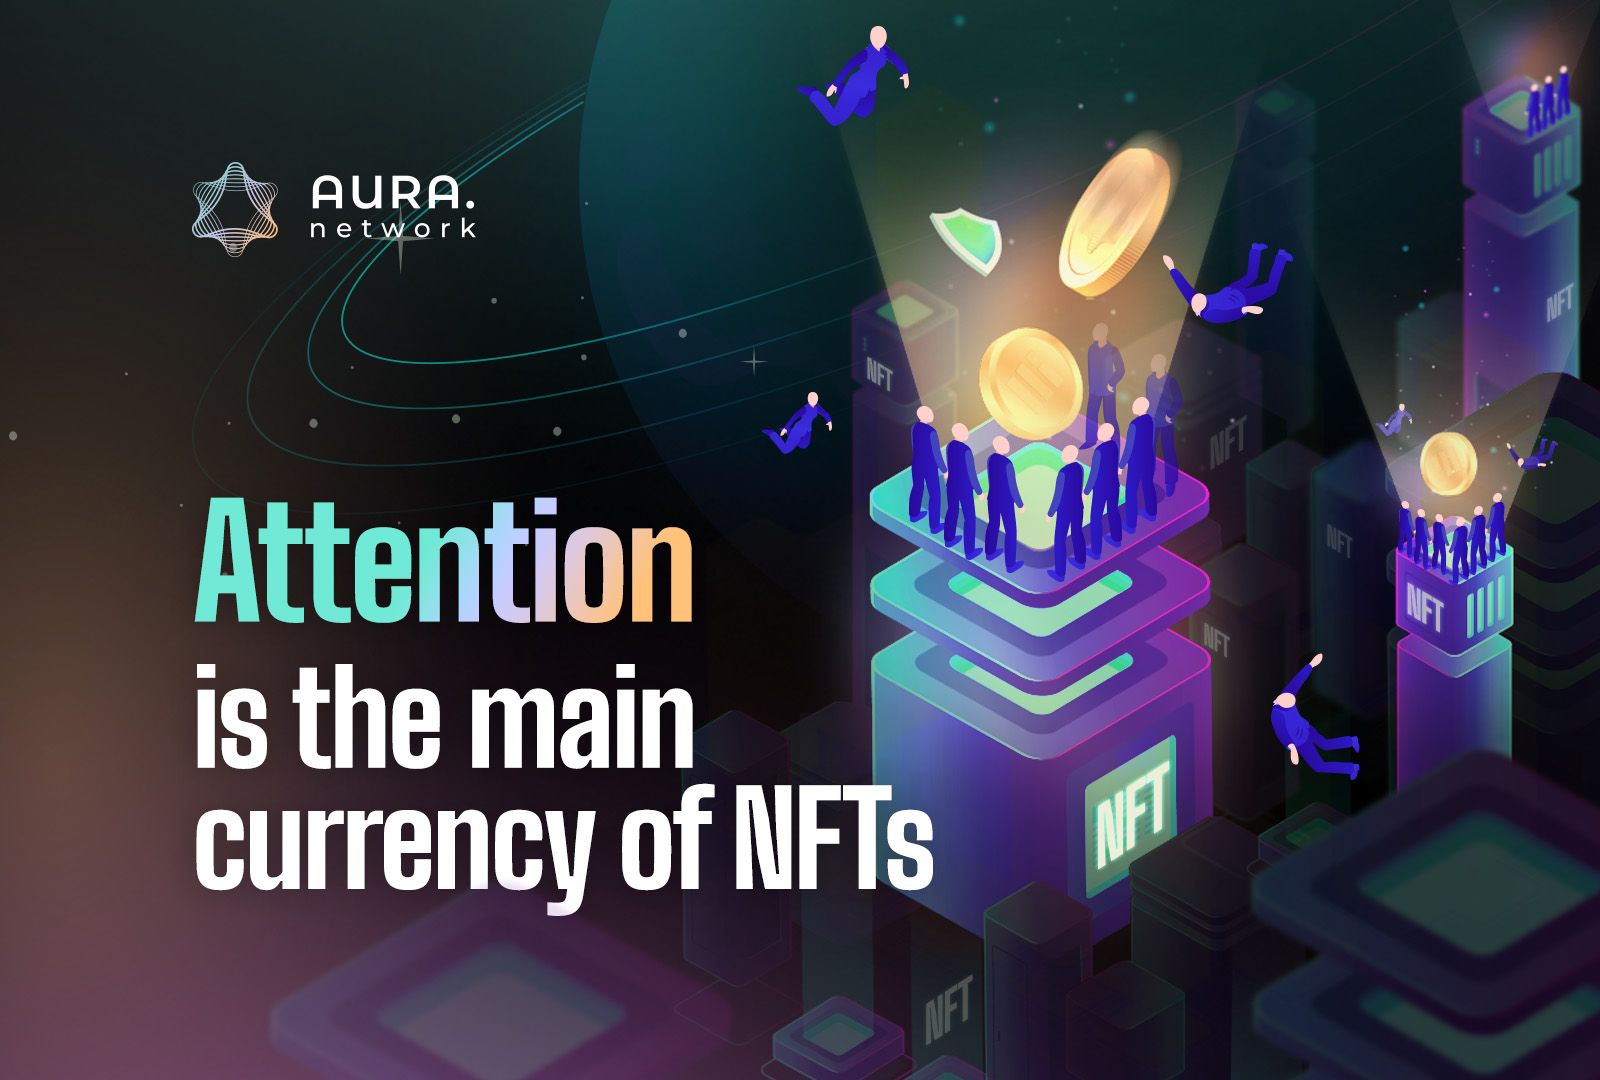 Attention is the main currency of NFTs